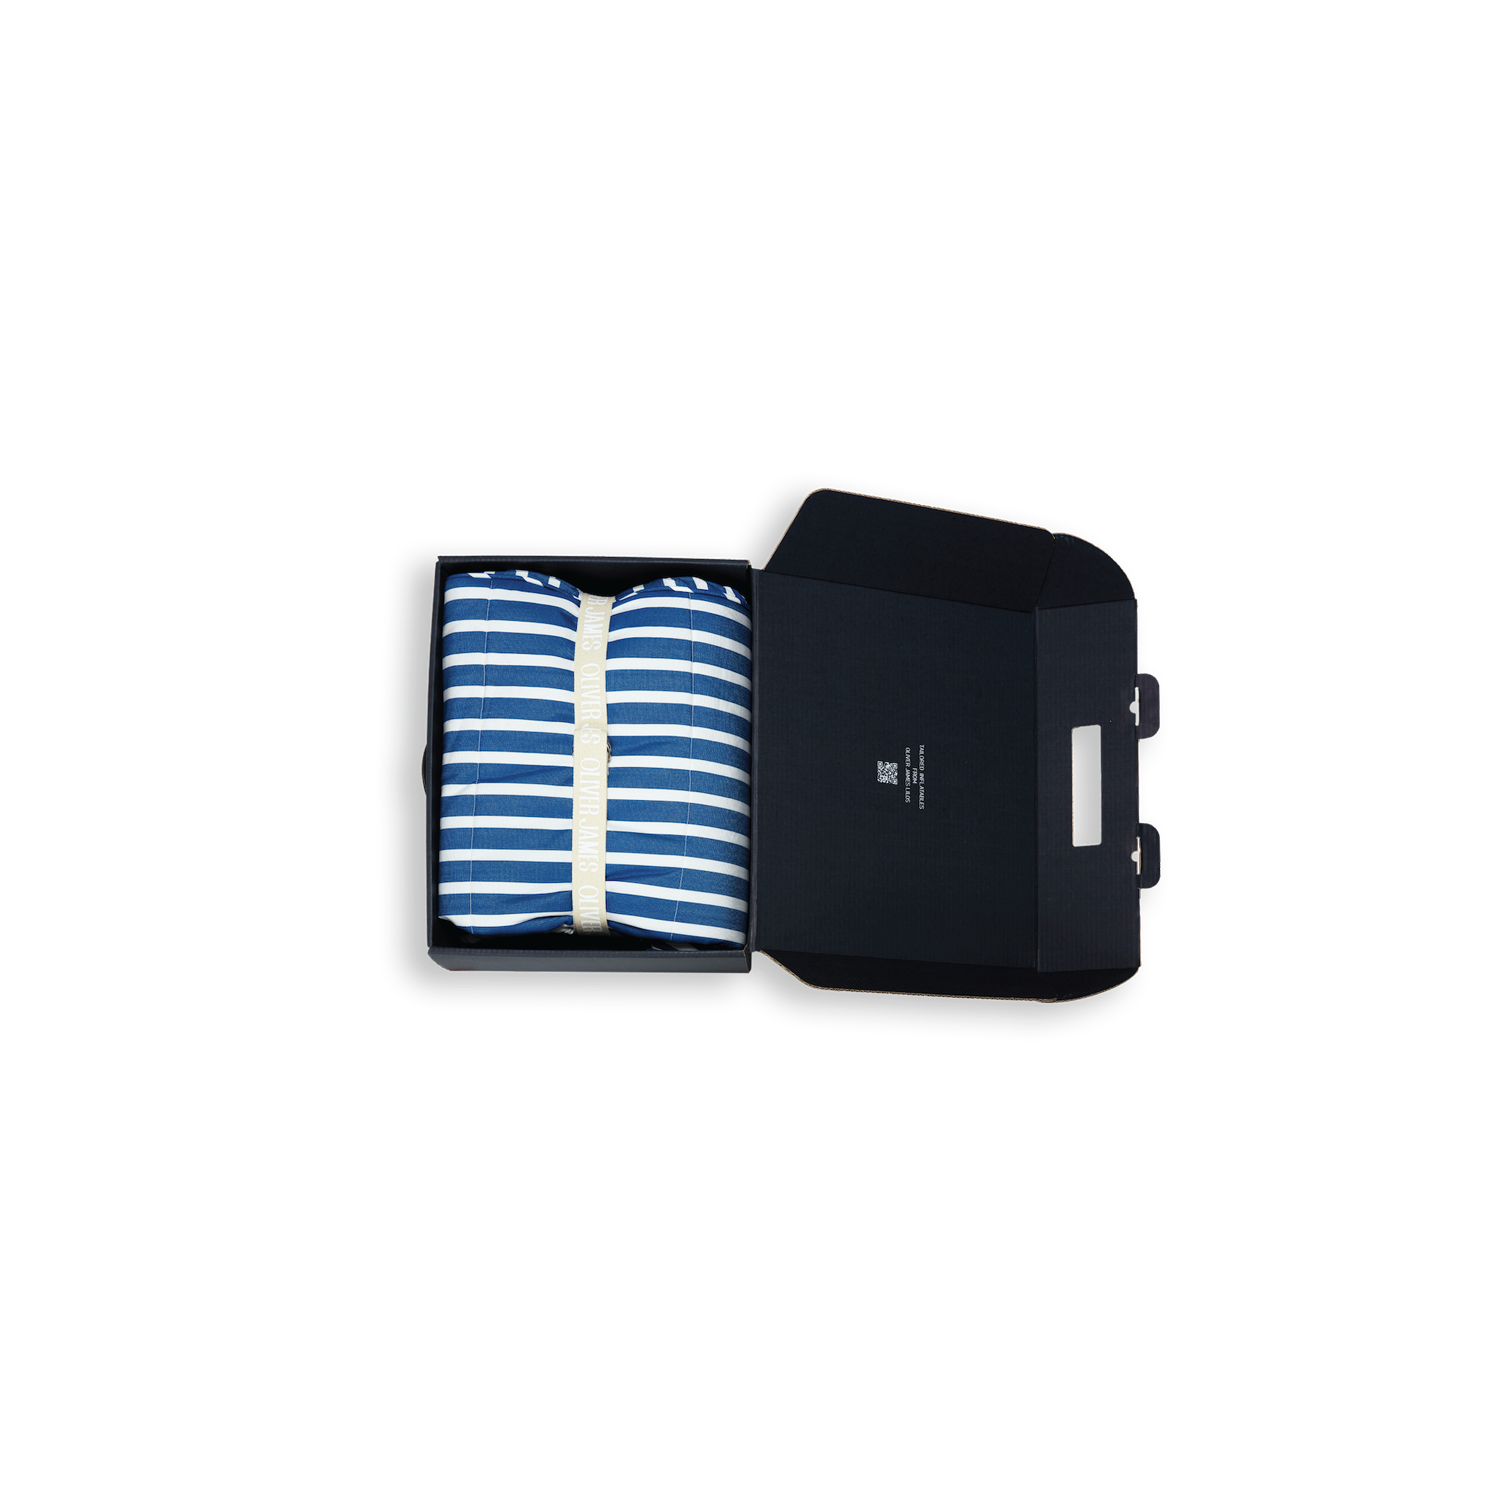 A single blue and white stripe inflatable luxury pool float lounger cover folded in black box box with a belt, card and pump.